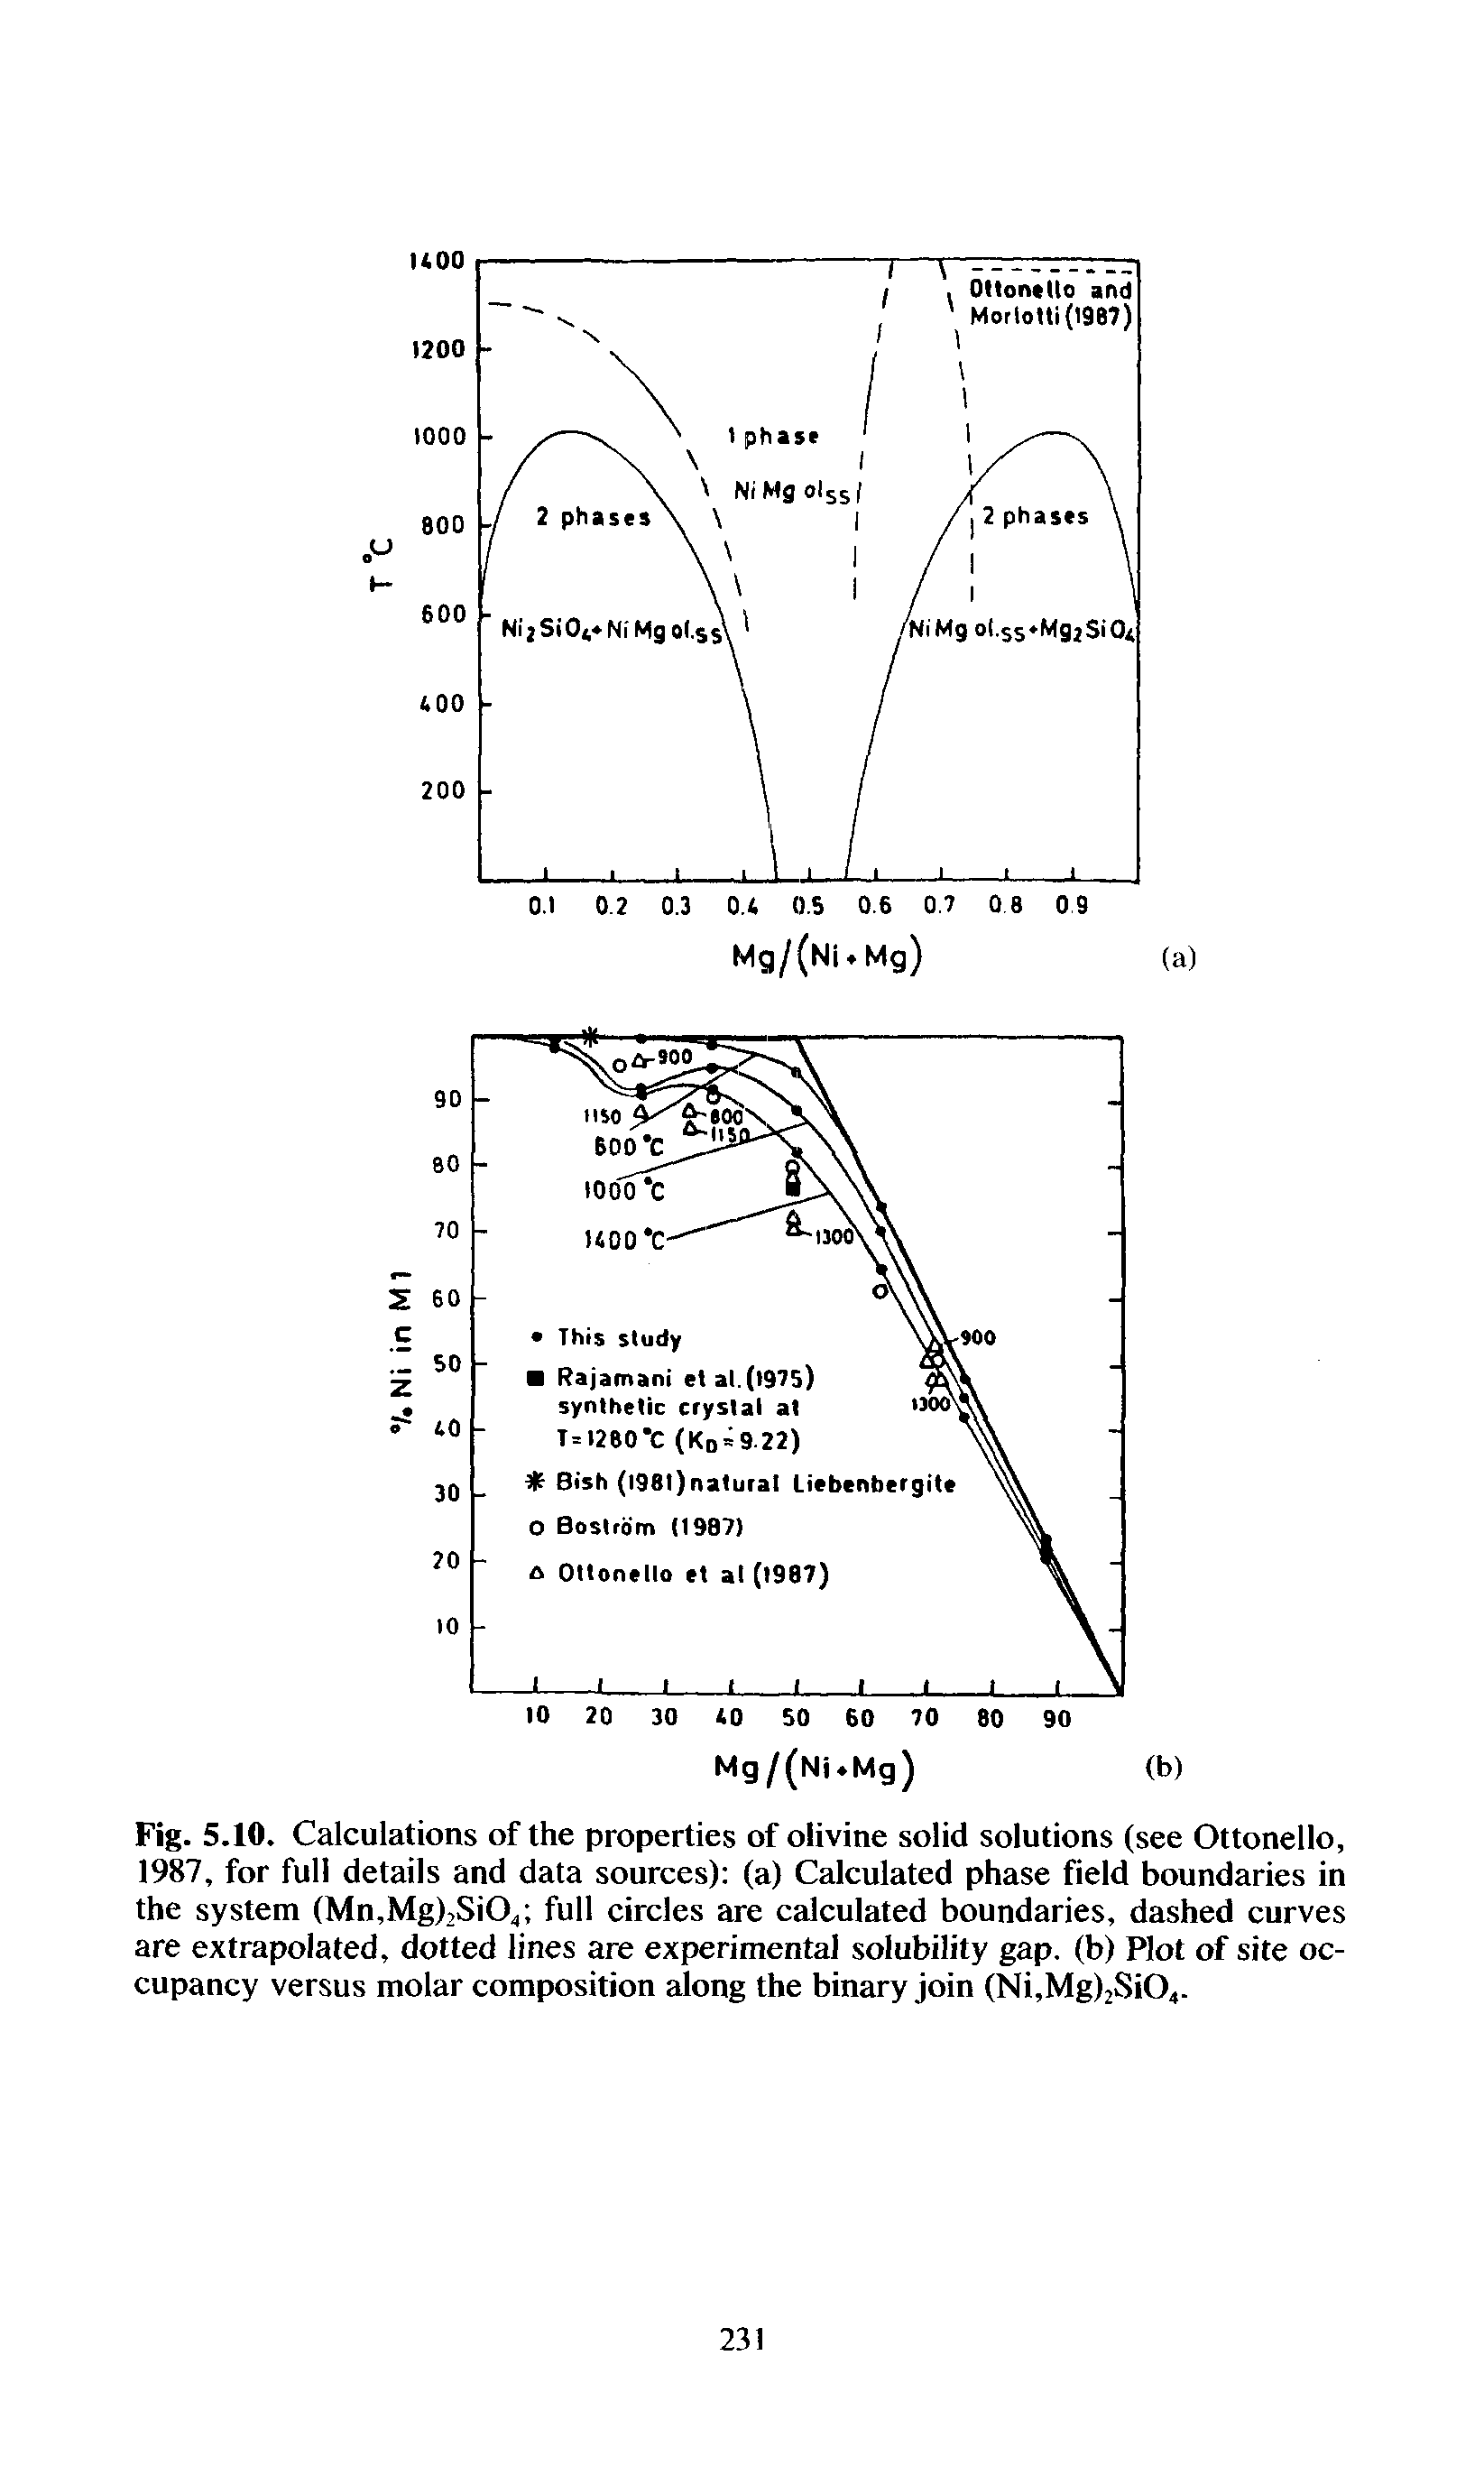 Fig. 5.10. Calculations of the properties of olivine solid solutions (see Ottonello, 1987, for full details and data sources) (a) Calculated phase field boundaries in the system (Mn,Mg),Si04 full circles are calculated boundaries, dashed curves are extrapolated, dotted lines are experimental solubility gap. (b) Plot of site occupancy versus molar composition along the binary join (Ni,Mg)2Si04-...